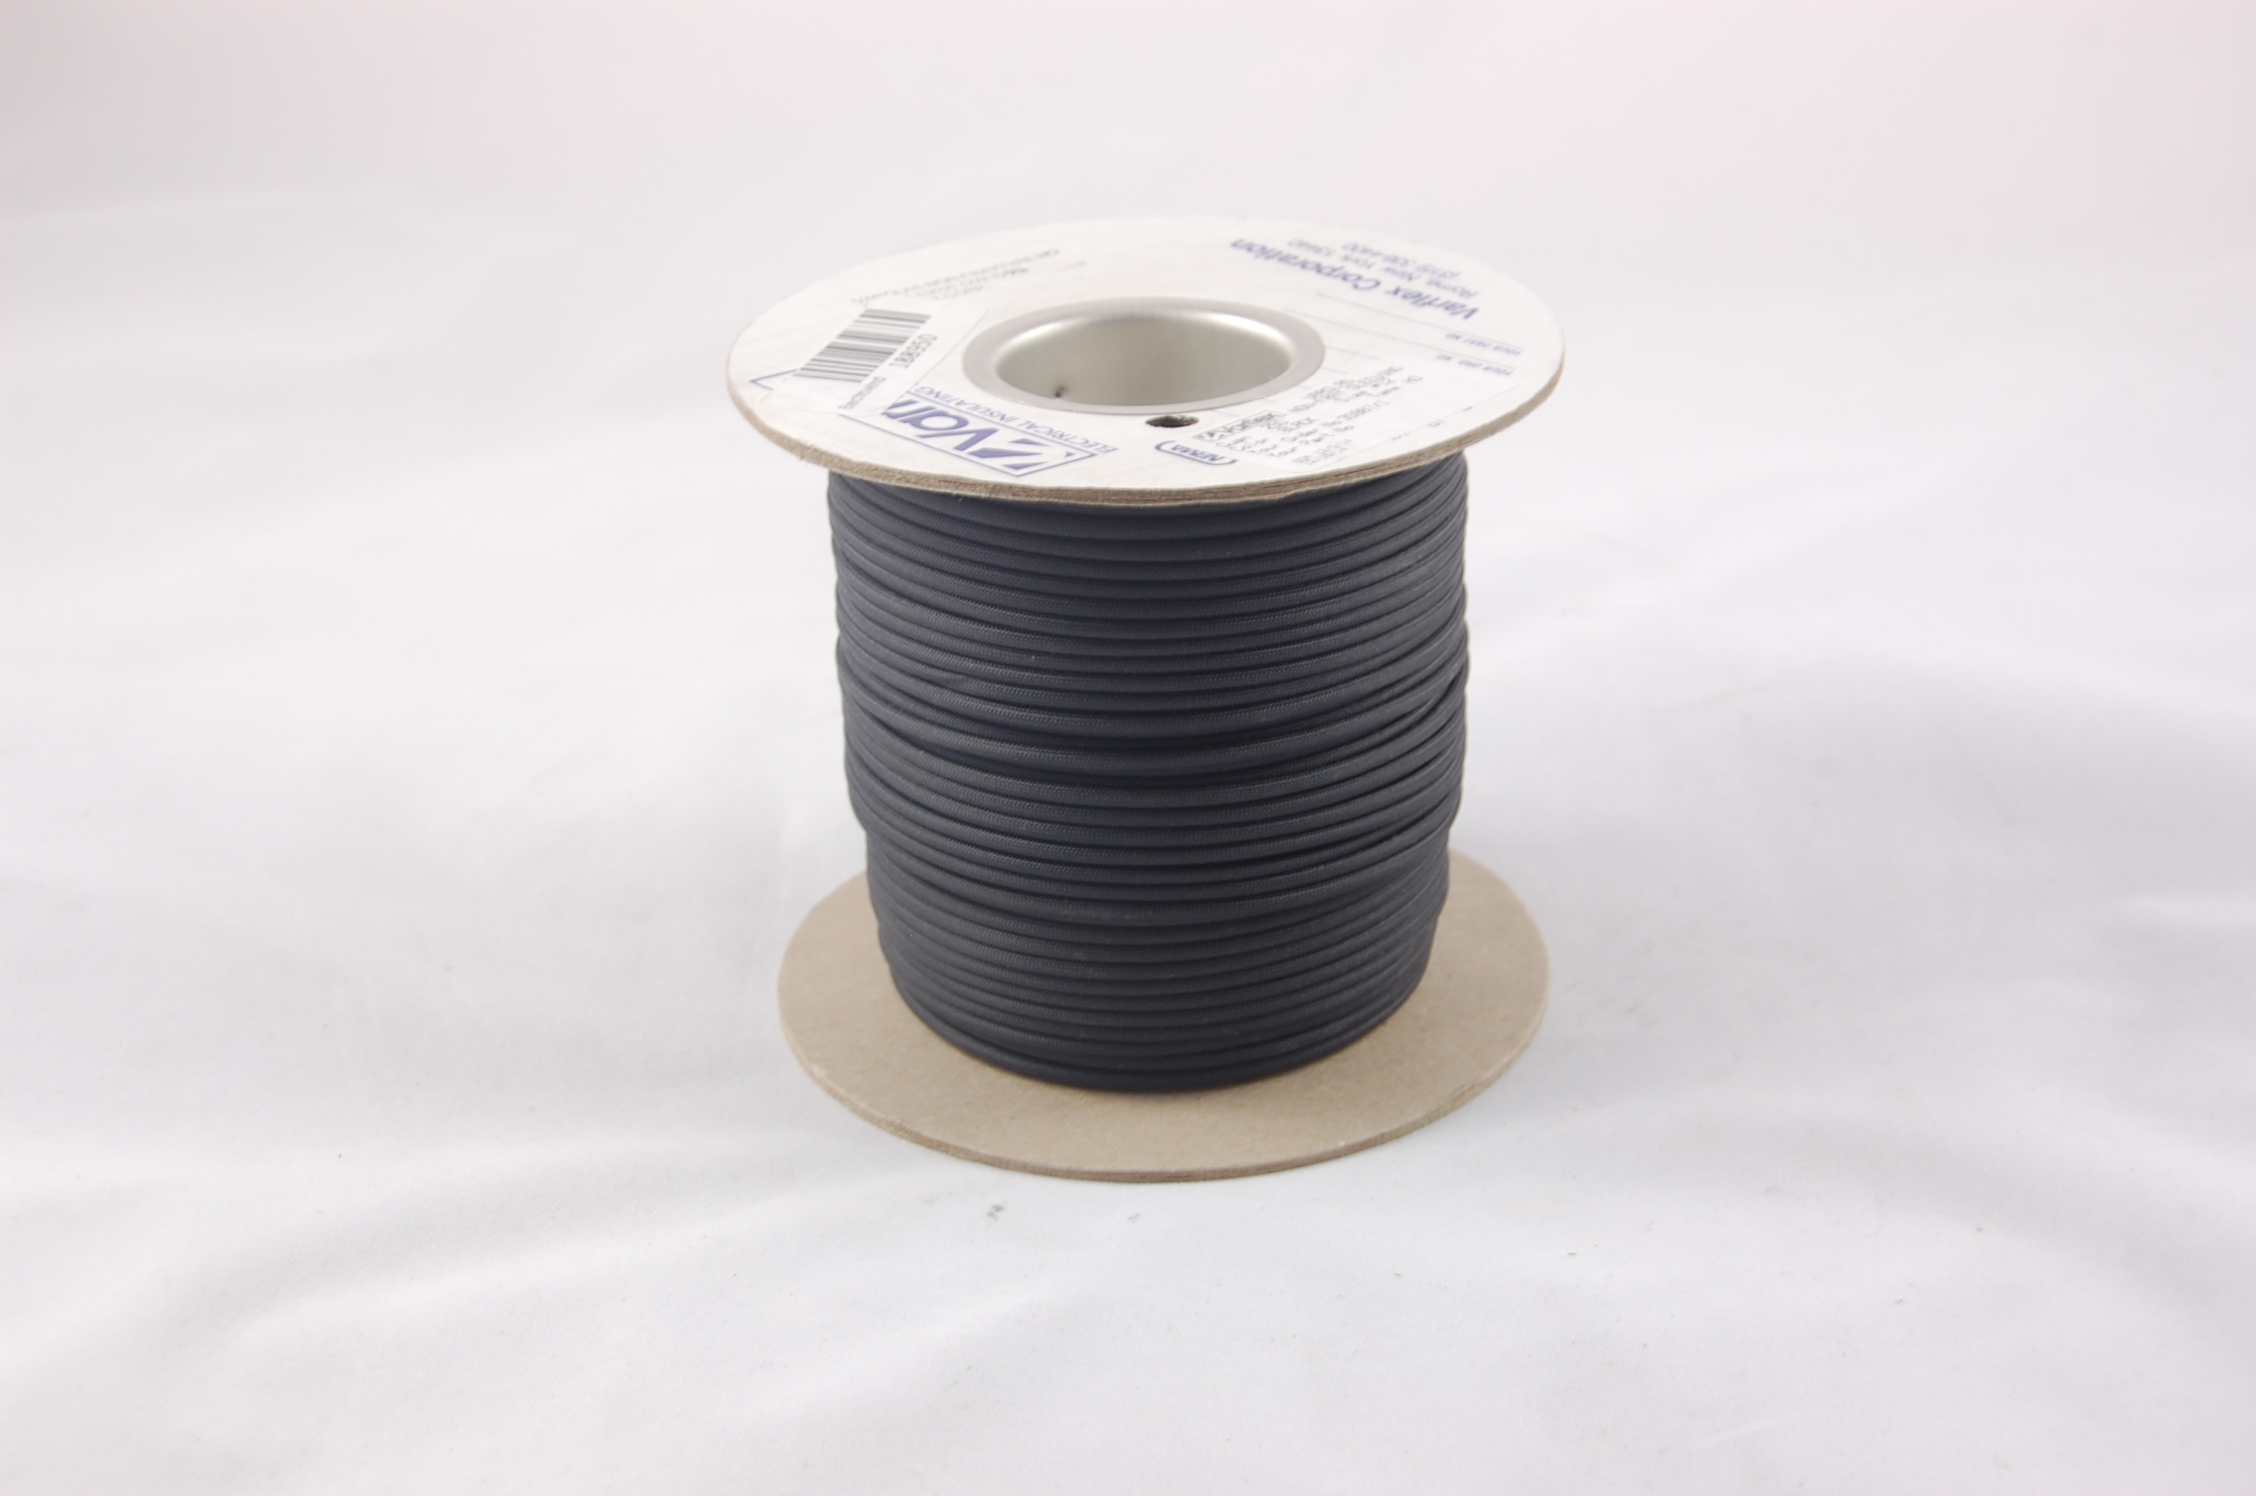 #10 AWG Varglas Type HO Heat-Cleaned and Treated High Temperature Non-Fray Flexible Fiberglass Sleeving , black, 250 FT per spool